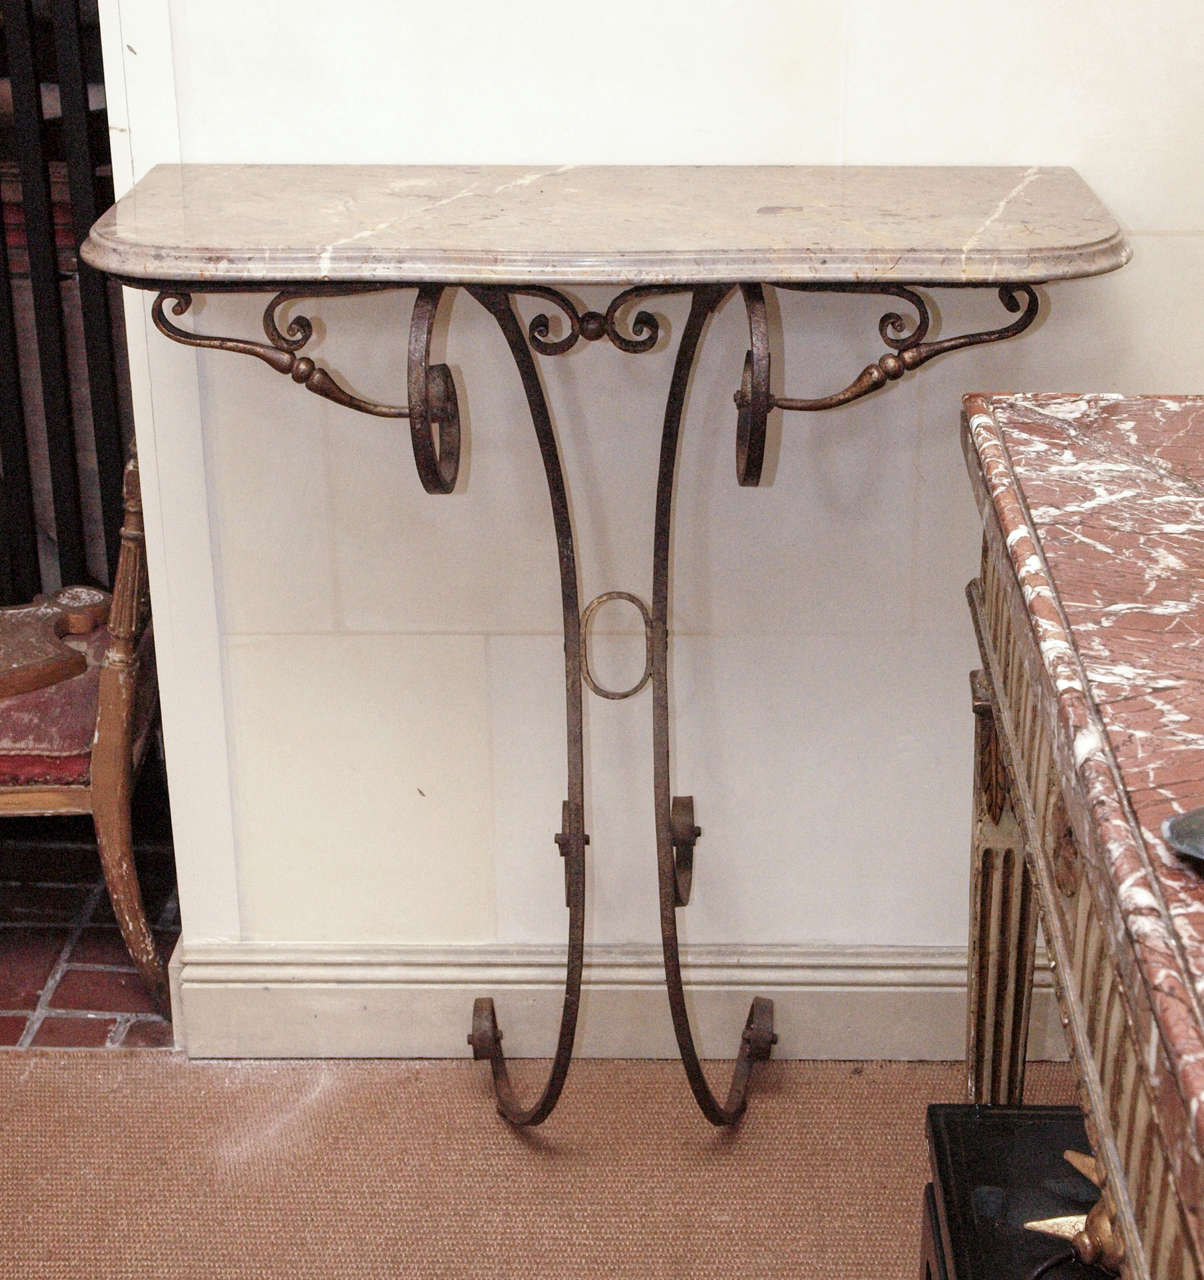 A 18th century French Rococo wrought iron wall console. The top is of sarrancolin marble. It shows well outdoors and indoors.